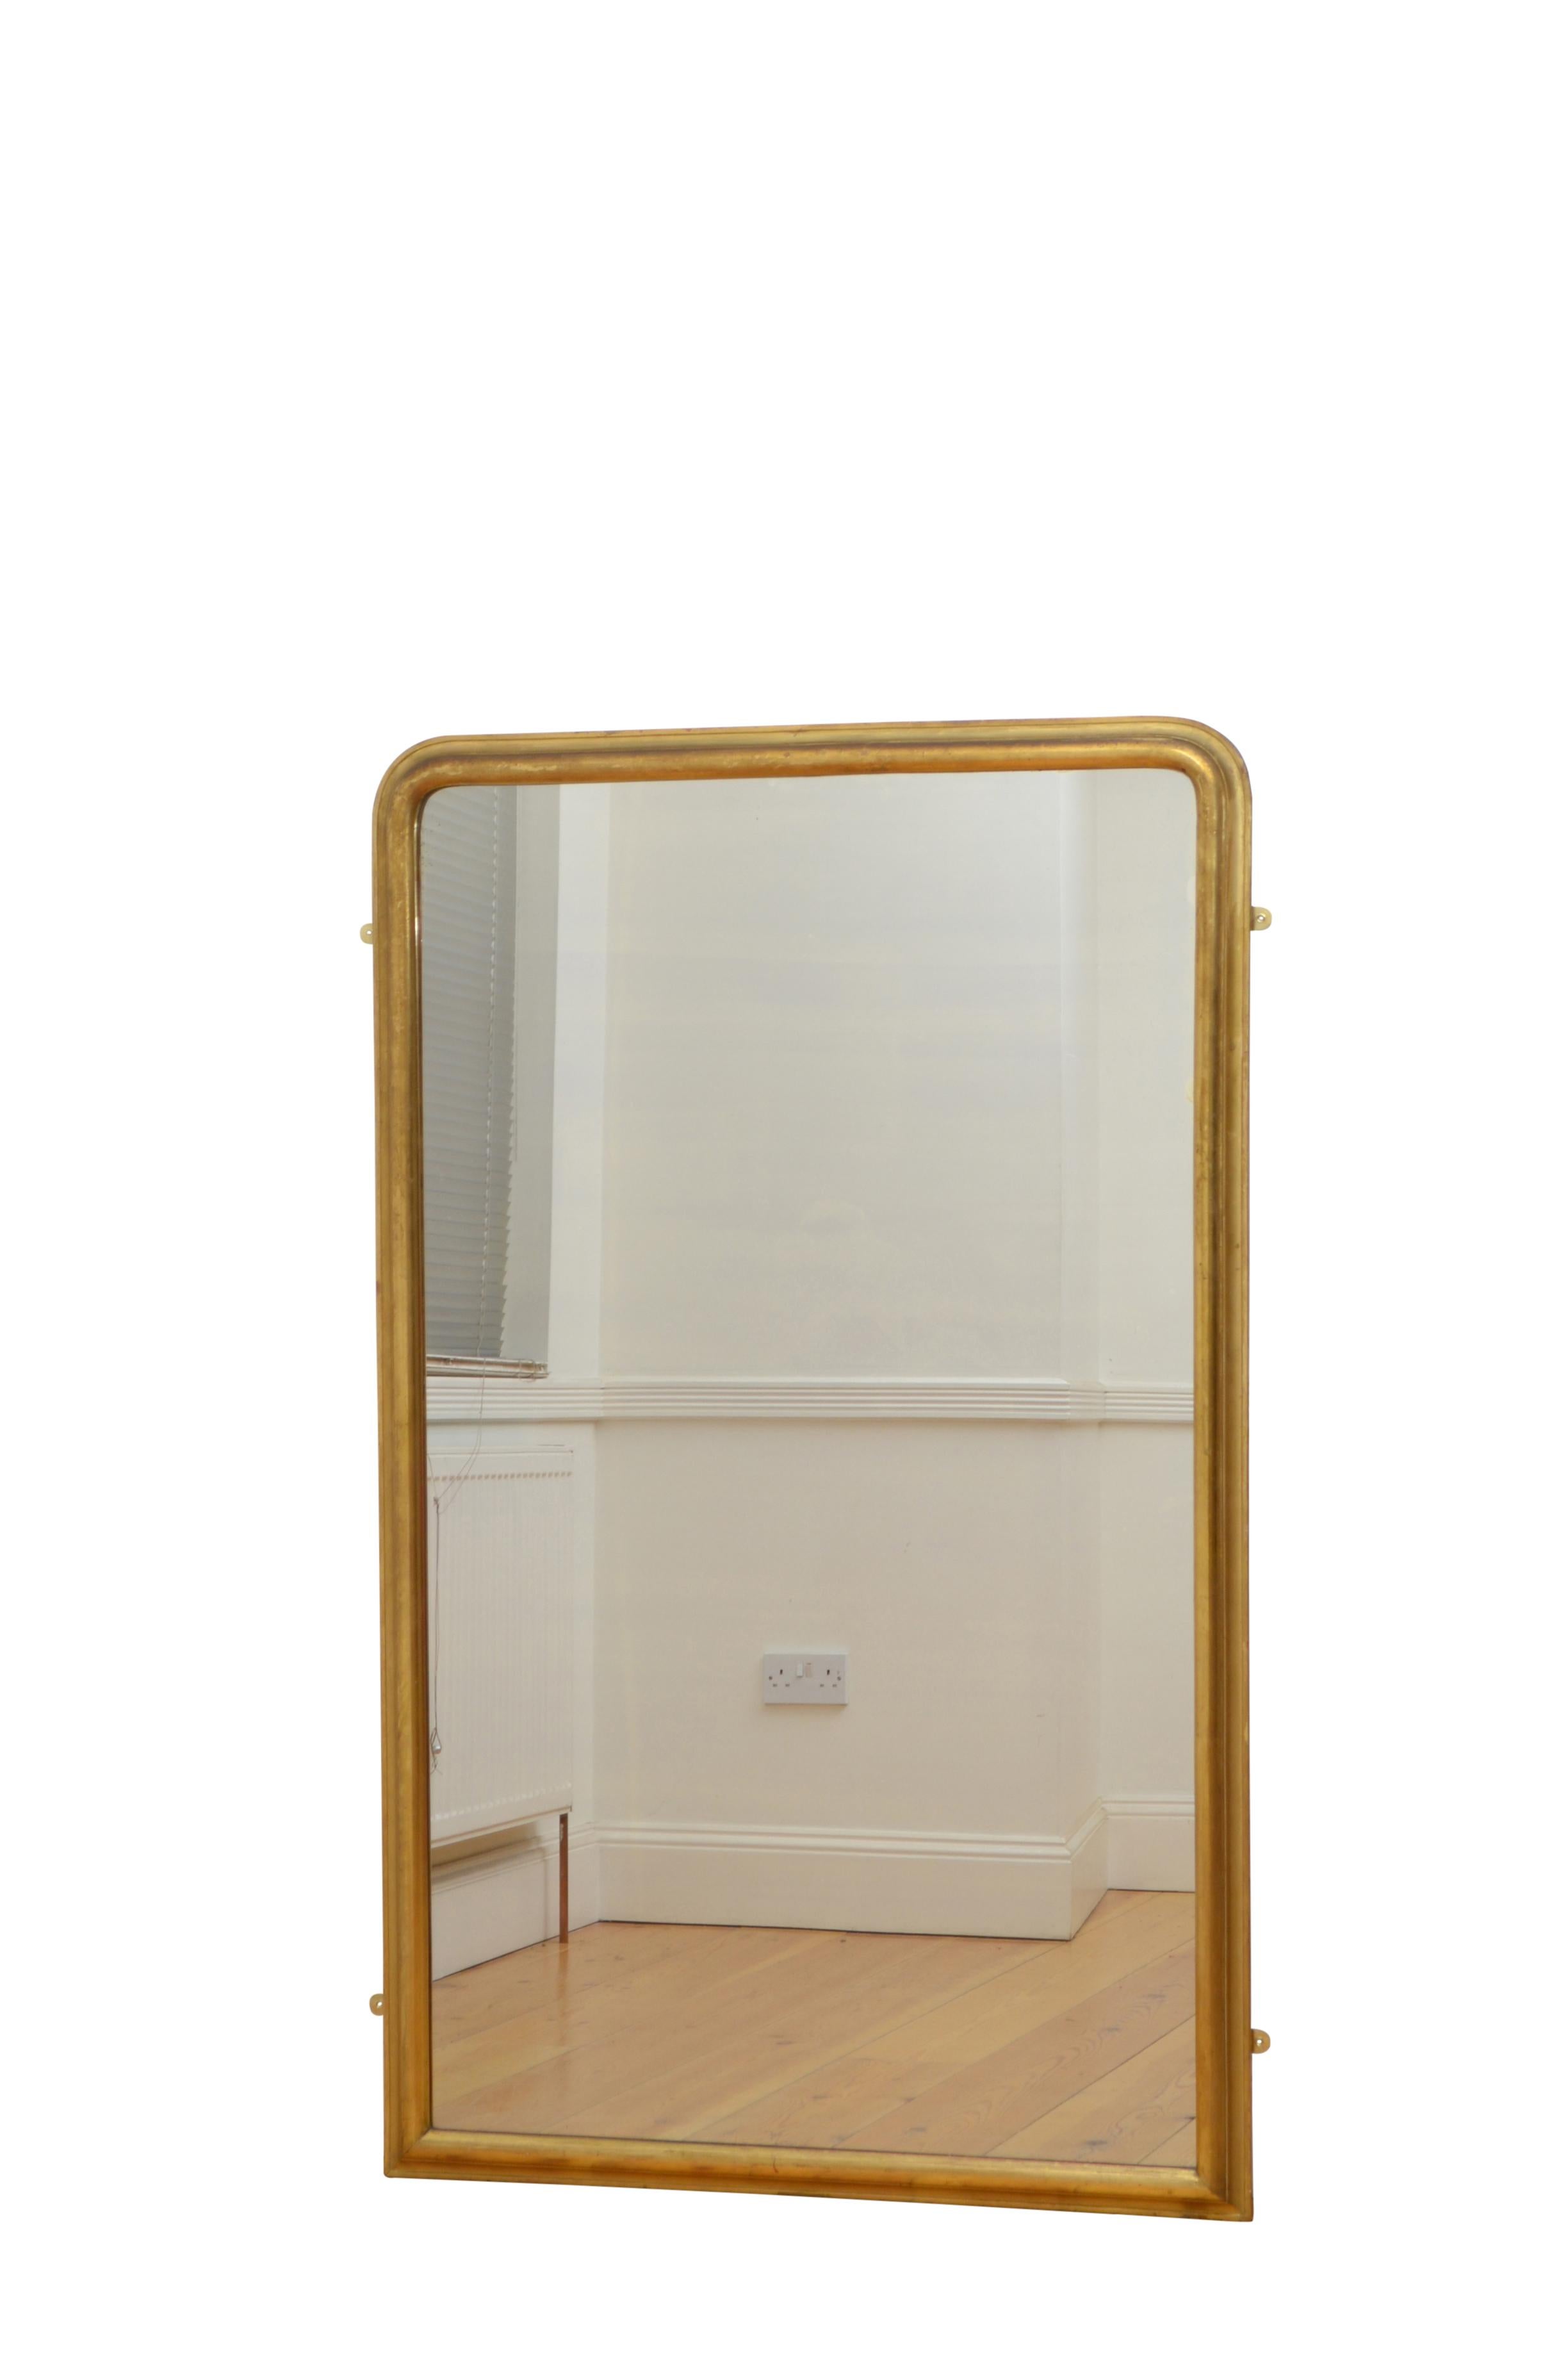 0235 fine quality, simple and elegant early 19th century full length or pier mirror, having original glass with air bubbles and some foxing in cushion moulded gilded frame.
This antique mirror retains its original glass, original gilt with red